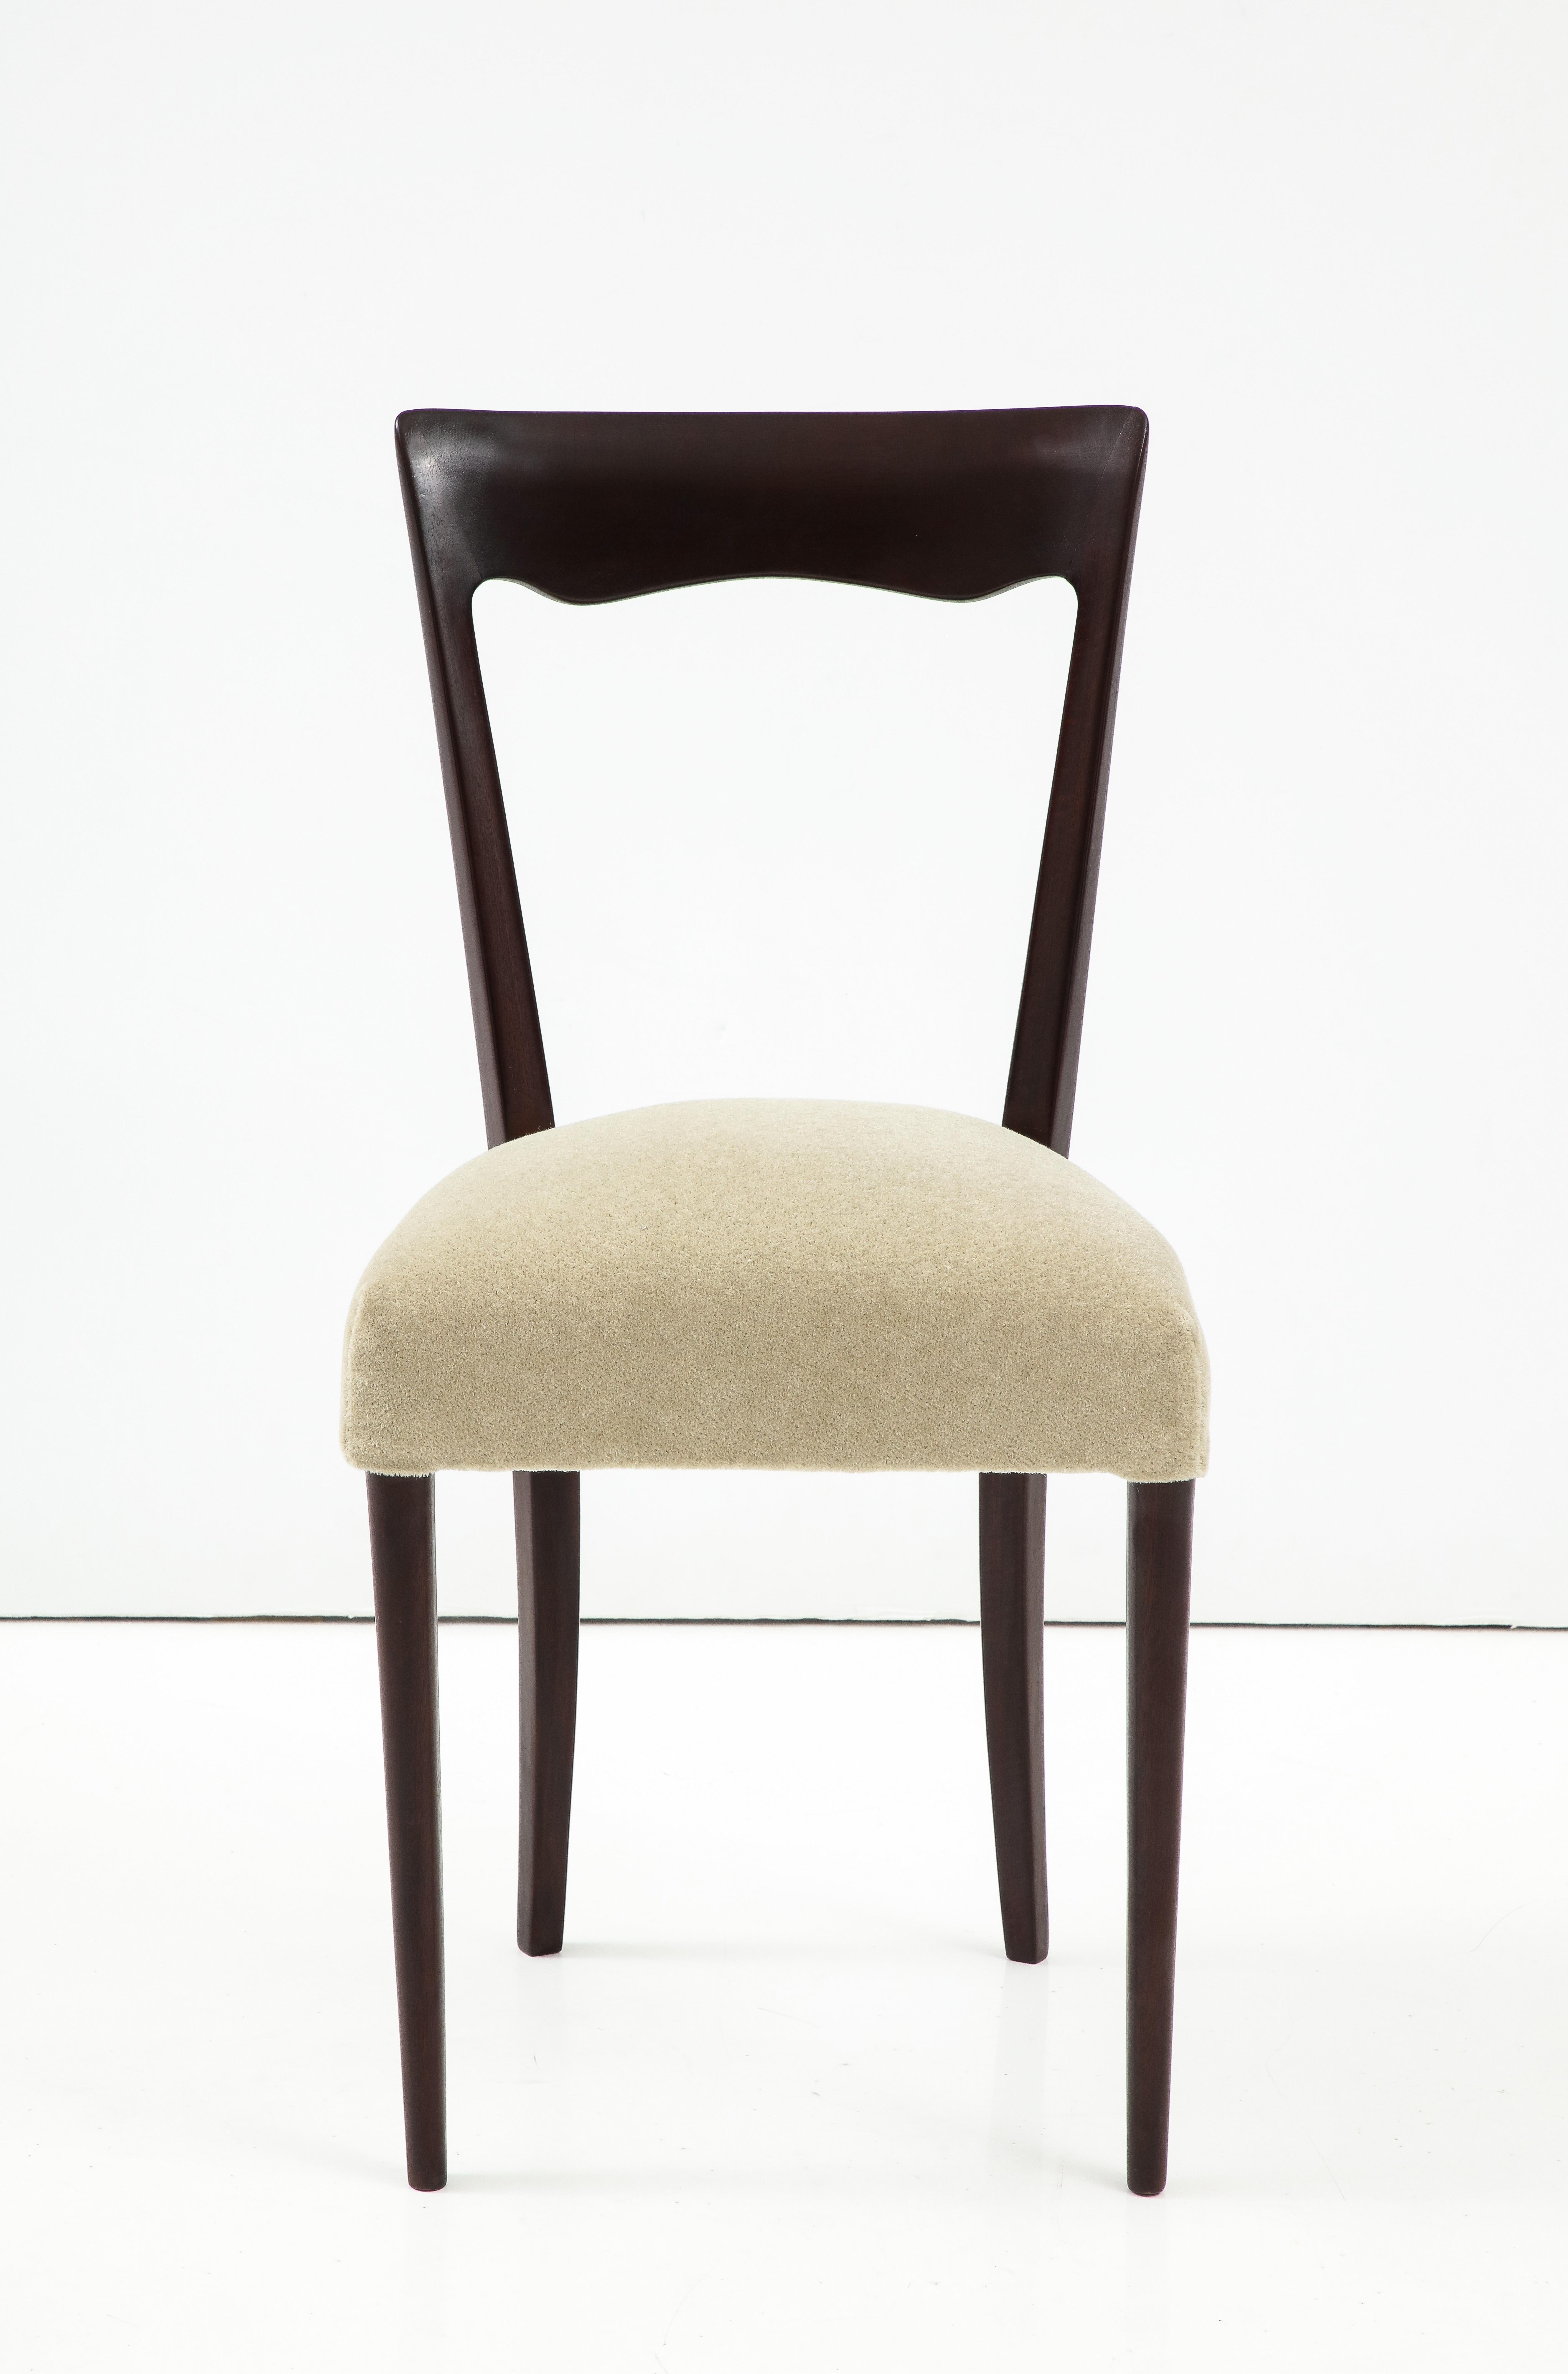 Mid-20th Century 1950's Modernist Italian Dining Chairs In Mohair Upholstery